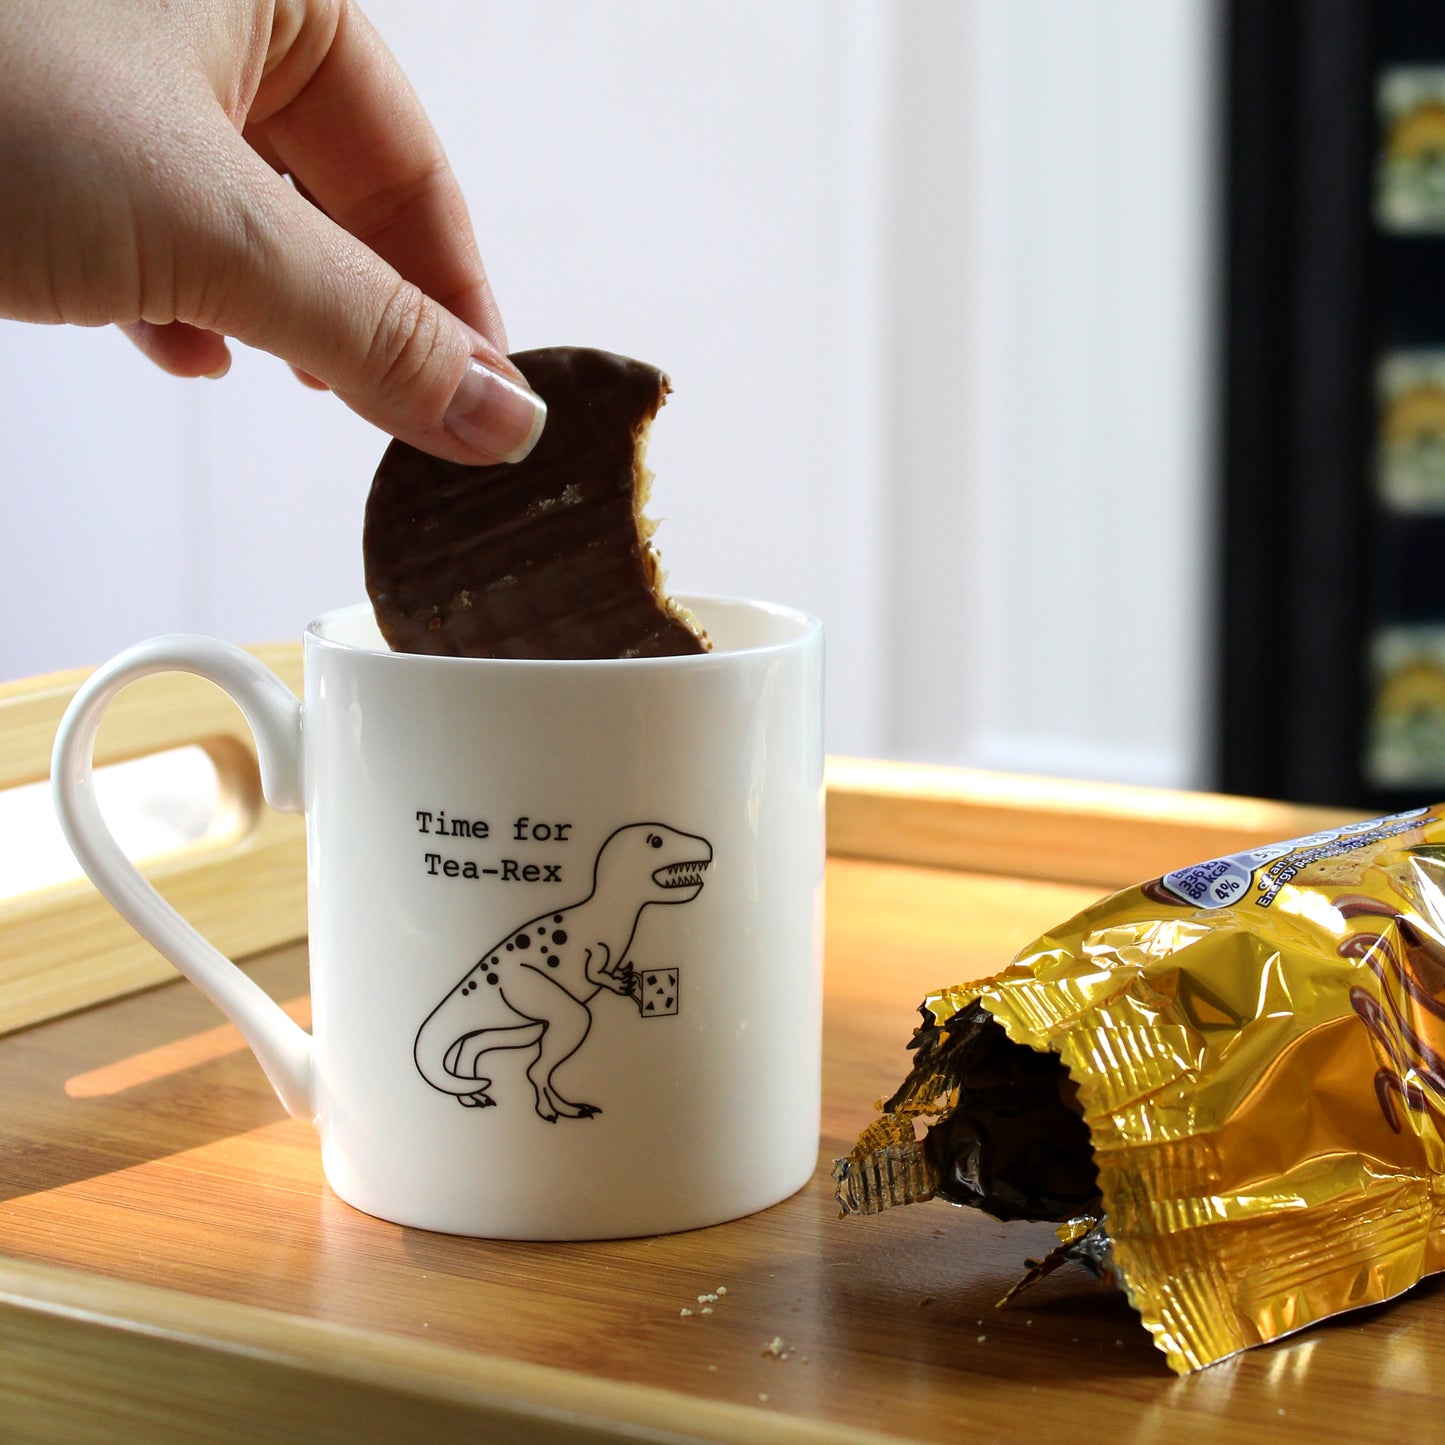 A hand dipping a partially eaten chocolate biscuit into a Time for Tea-Rex Mug